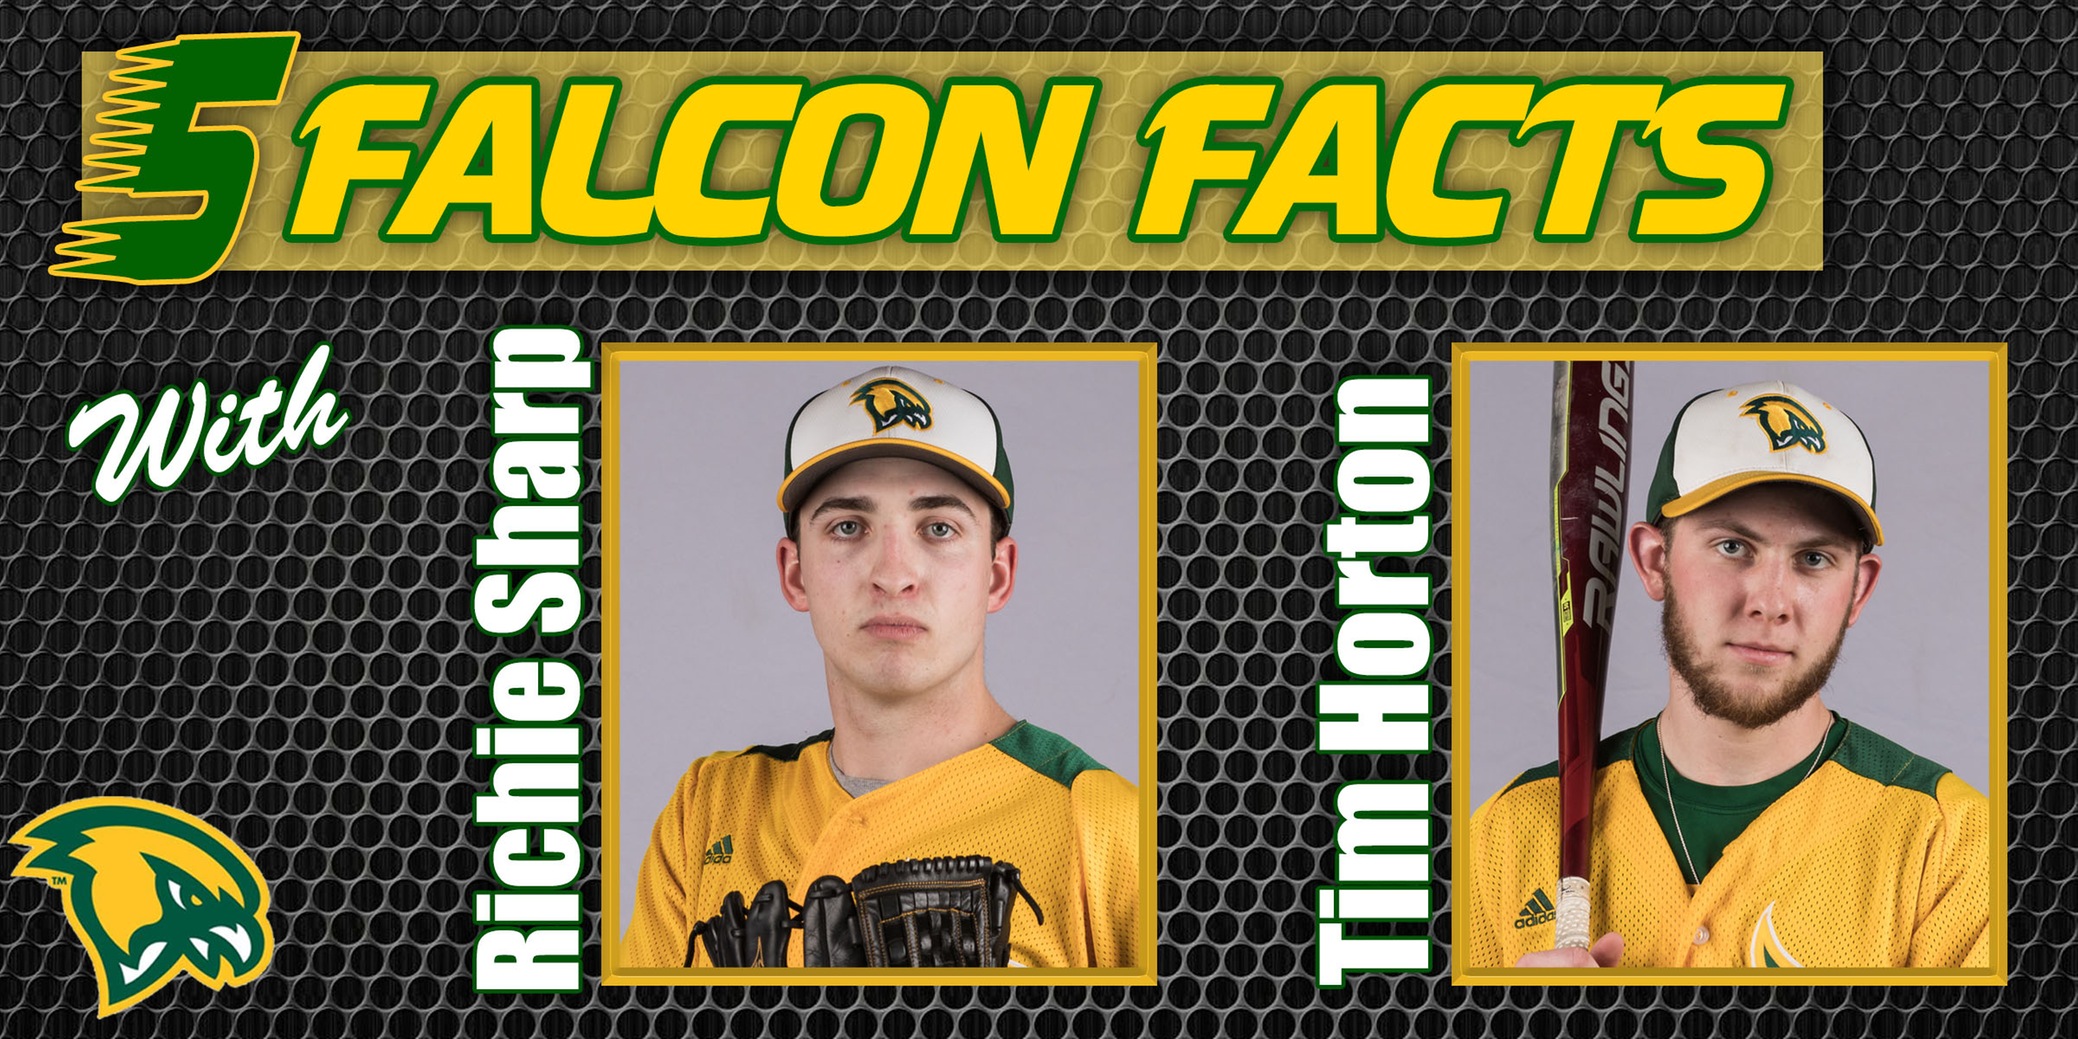 Five Falcon Facts with Horton & Sharp